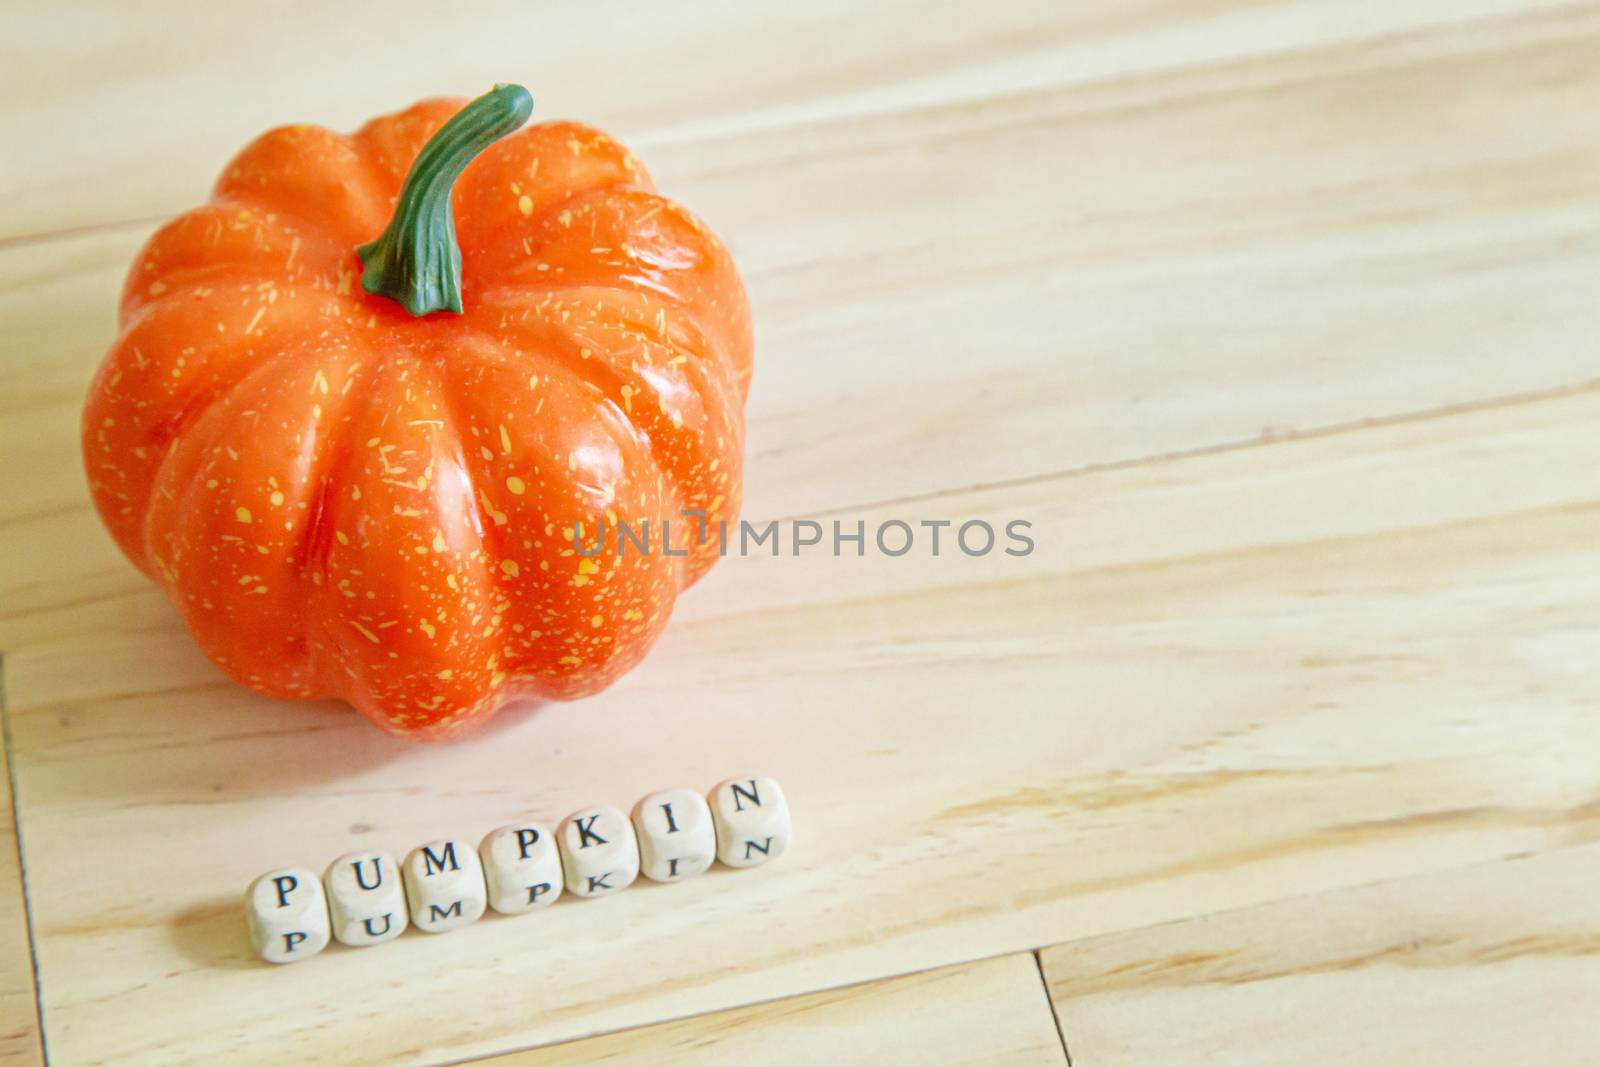 The pumpkin toy on wood table for food content.